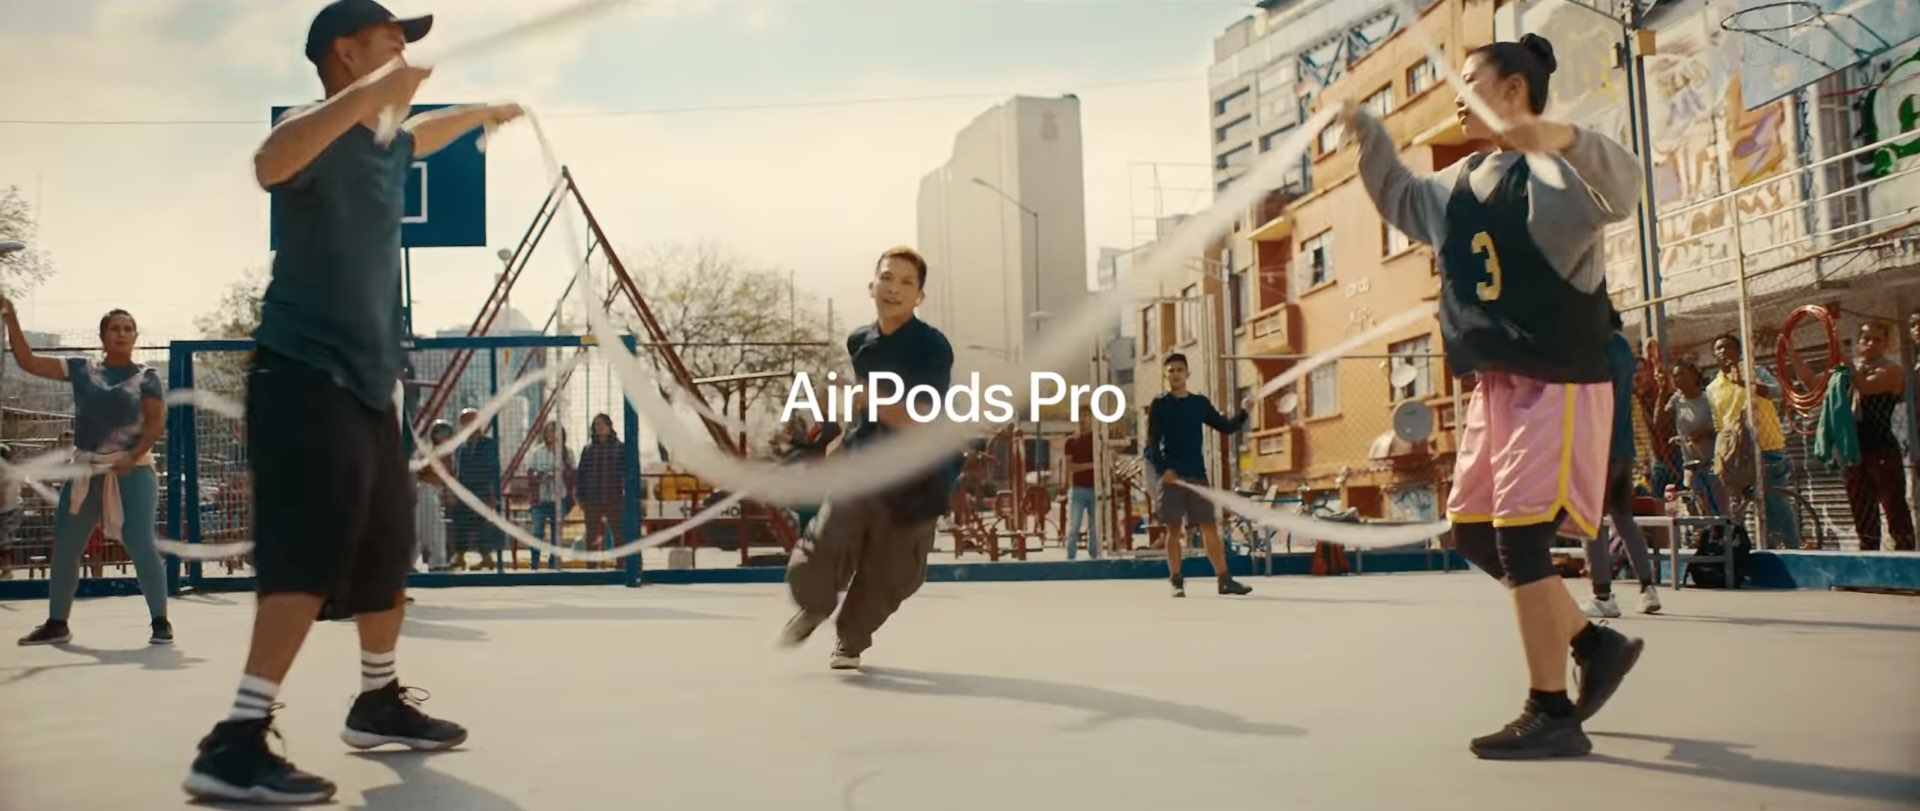 A still from Apple's video advertisement promoting the AirPods Pro earbuds 